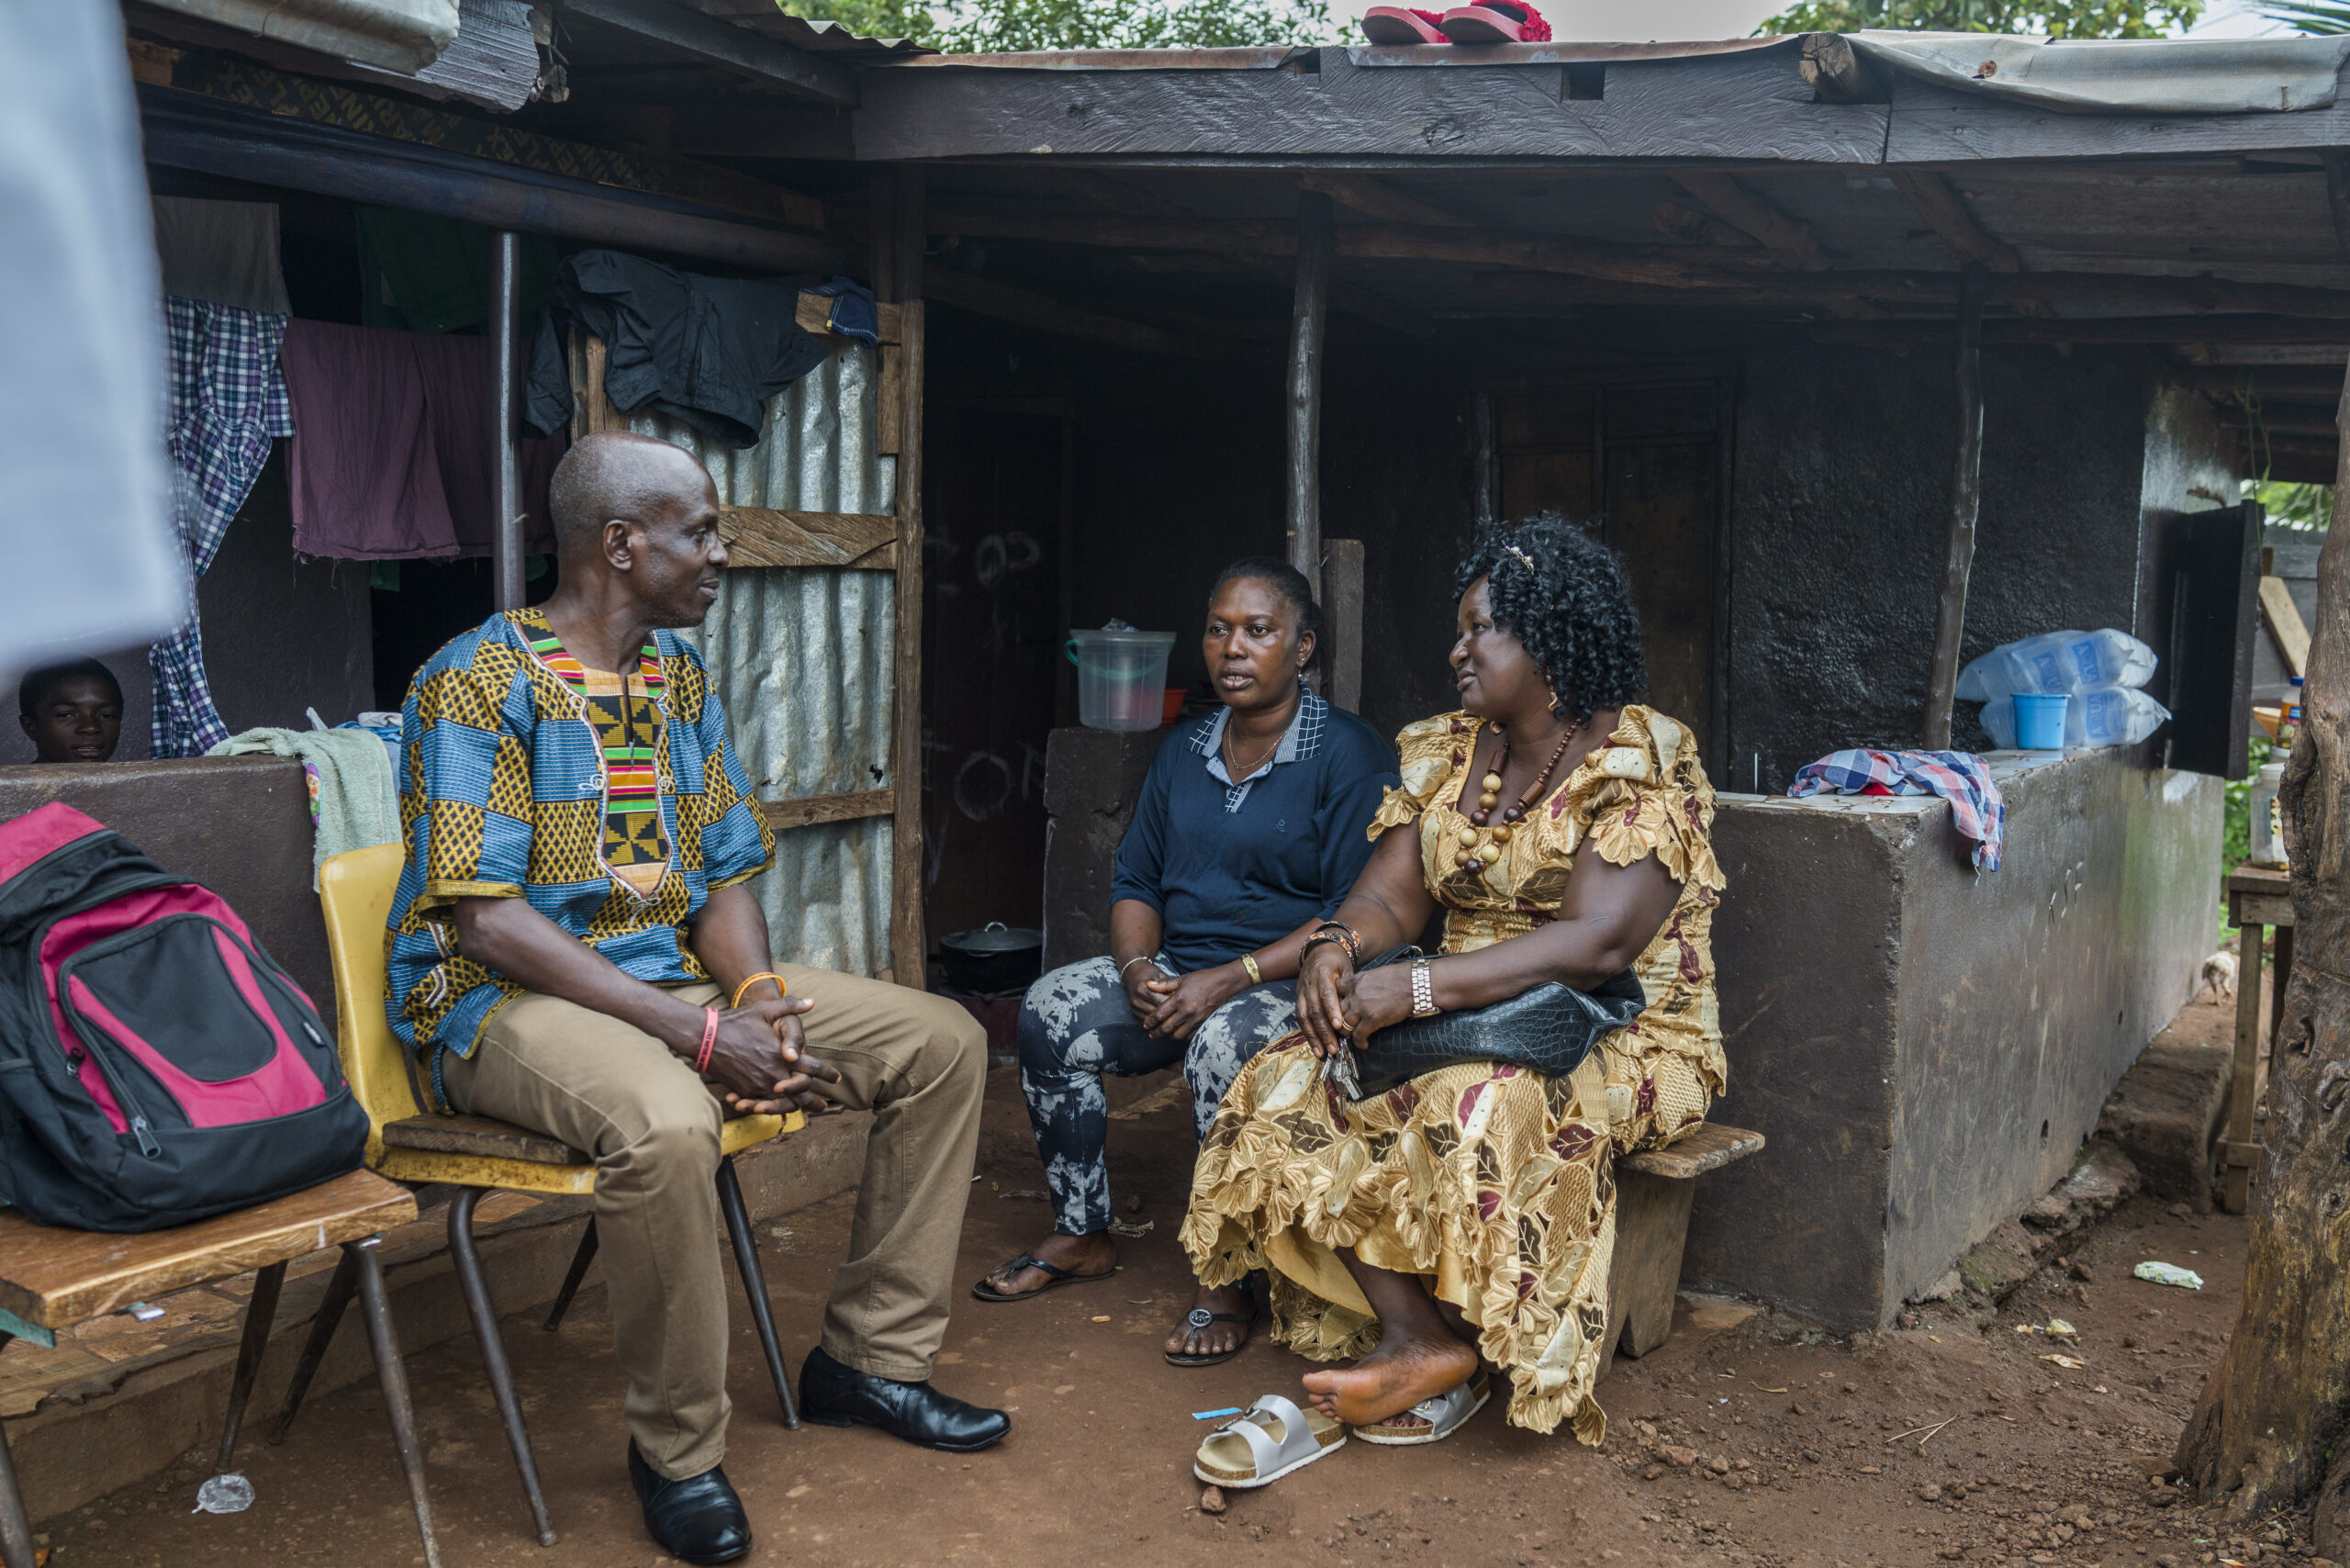 Paralegals providing legal advice to a woman in Freetown, Sierra Leone.